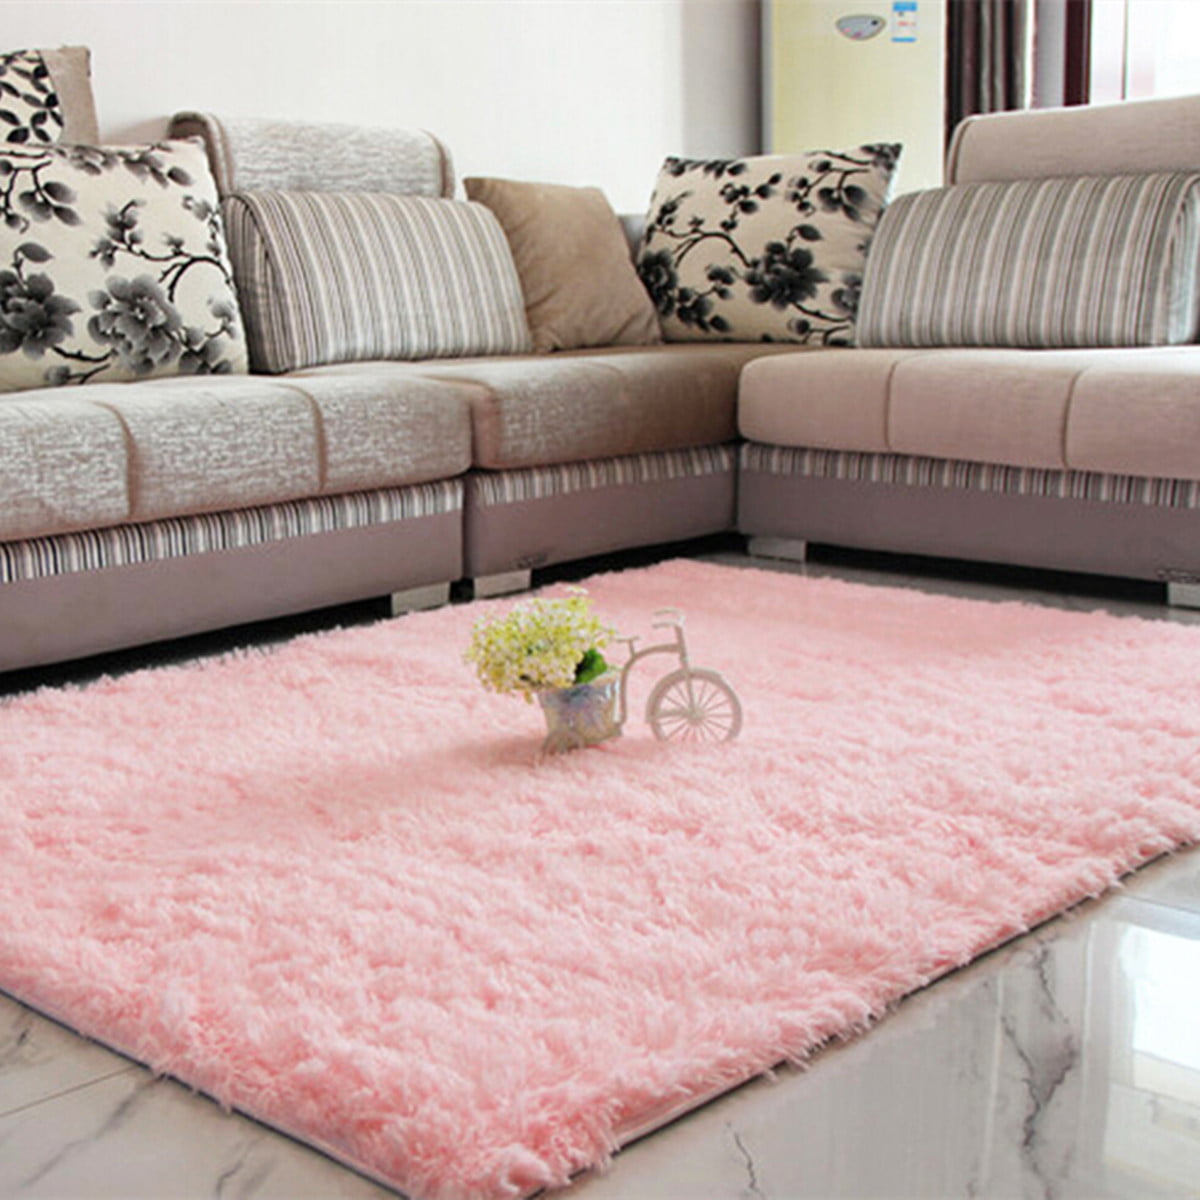 63x48 Inch Area Rug with Flower Rose and Peonies Floor Rug,Non-Slip Large Carpet for Bedroom,Living Room,Kids Room 